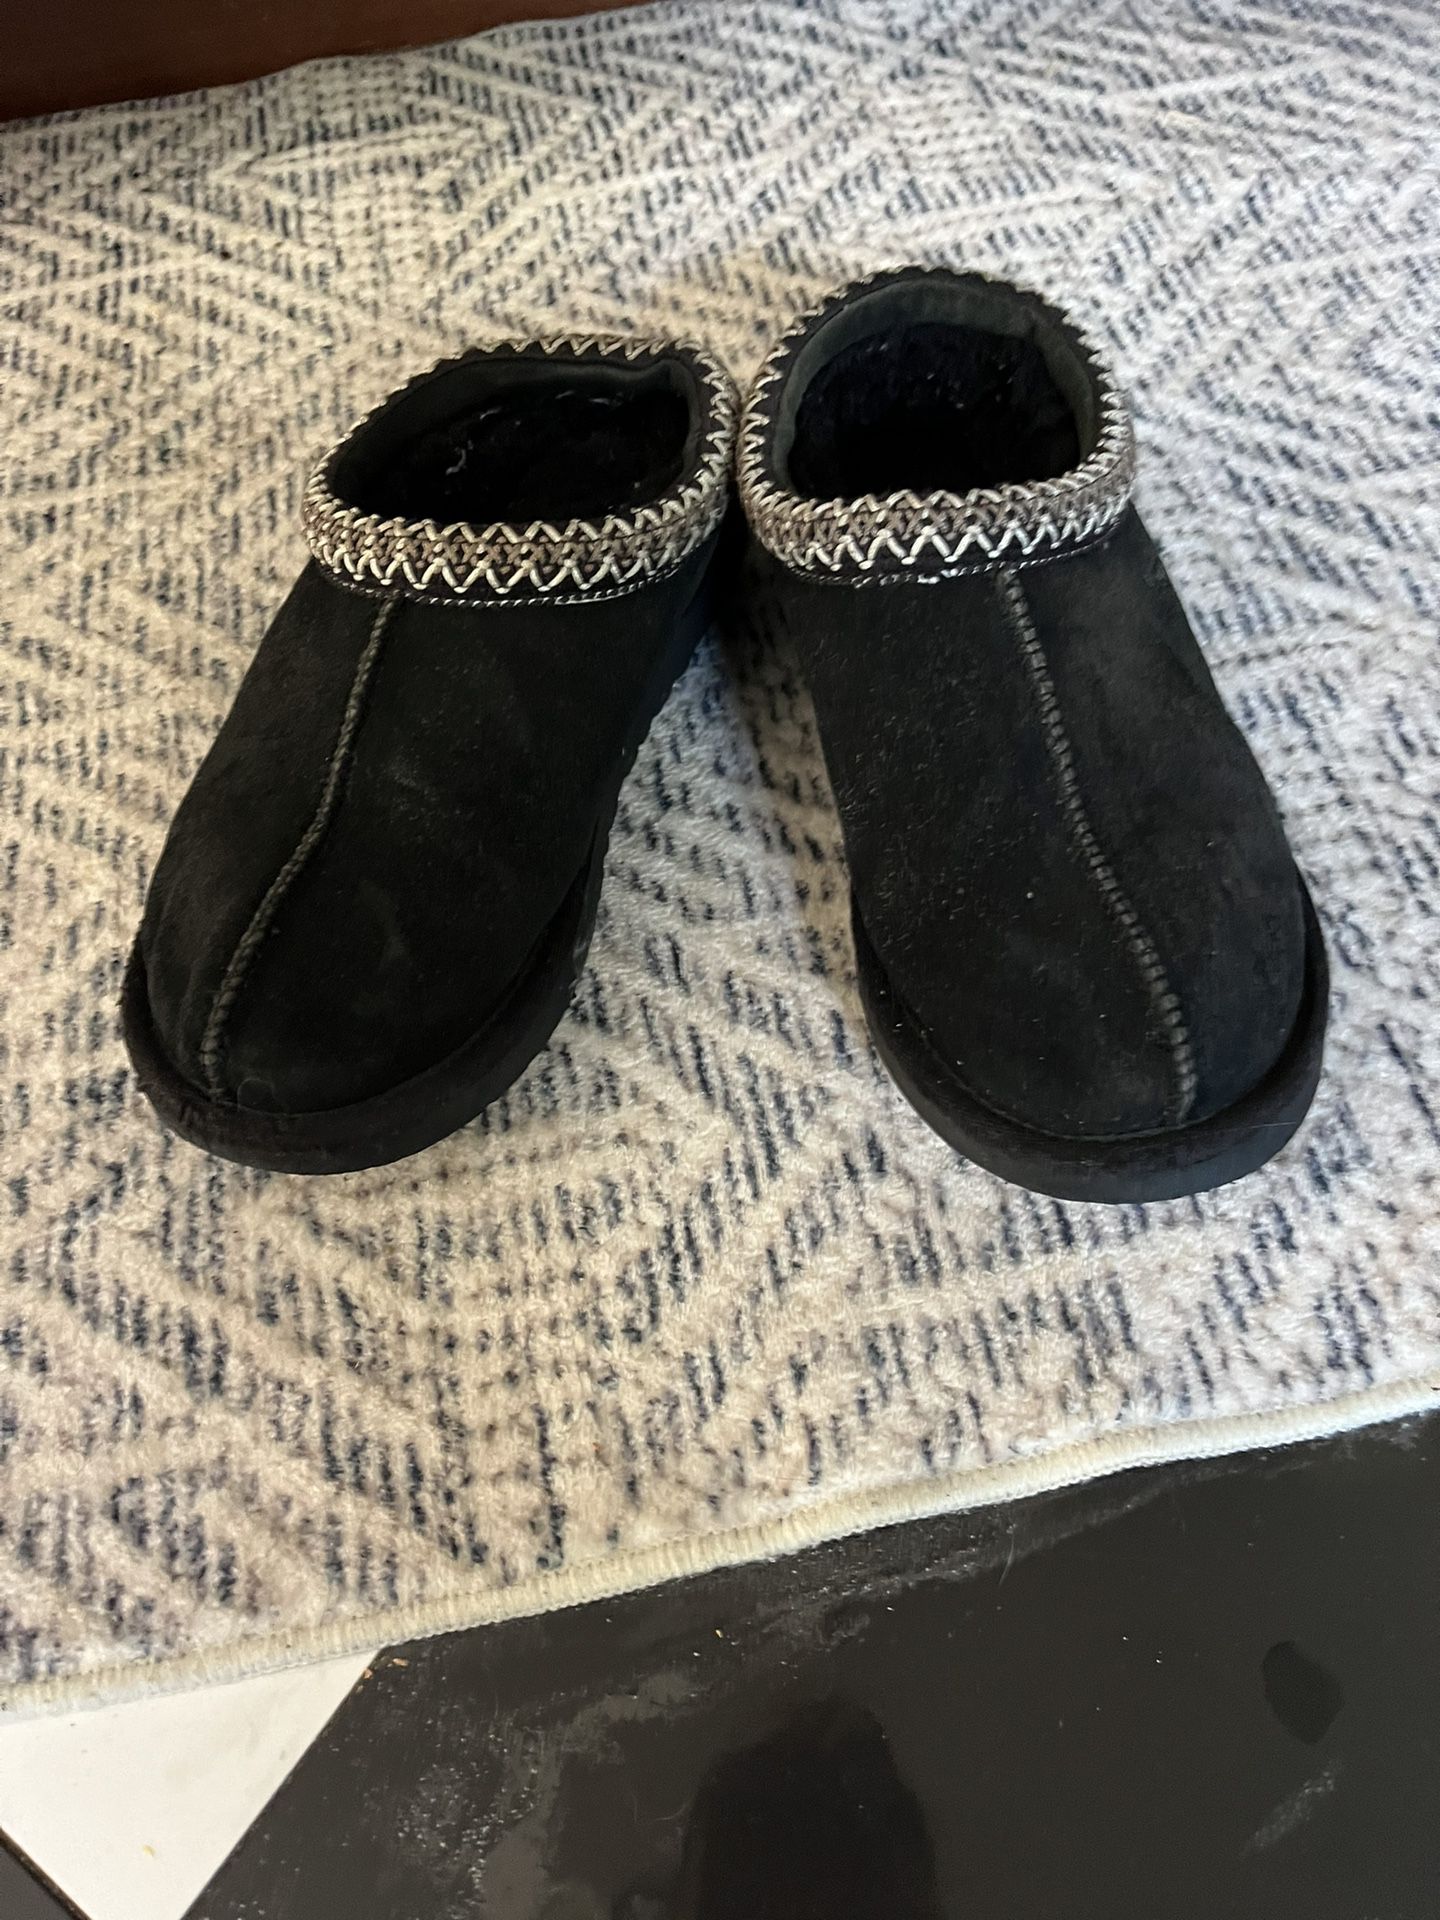 Uggs Black Color Slippers  Authentic 